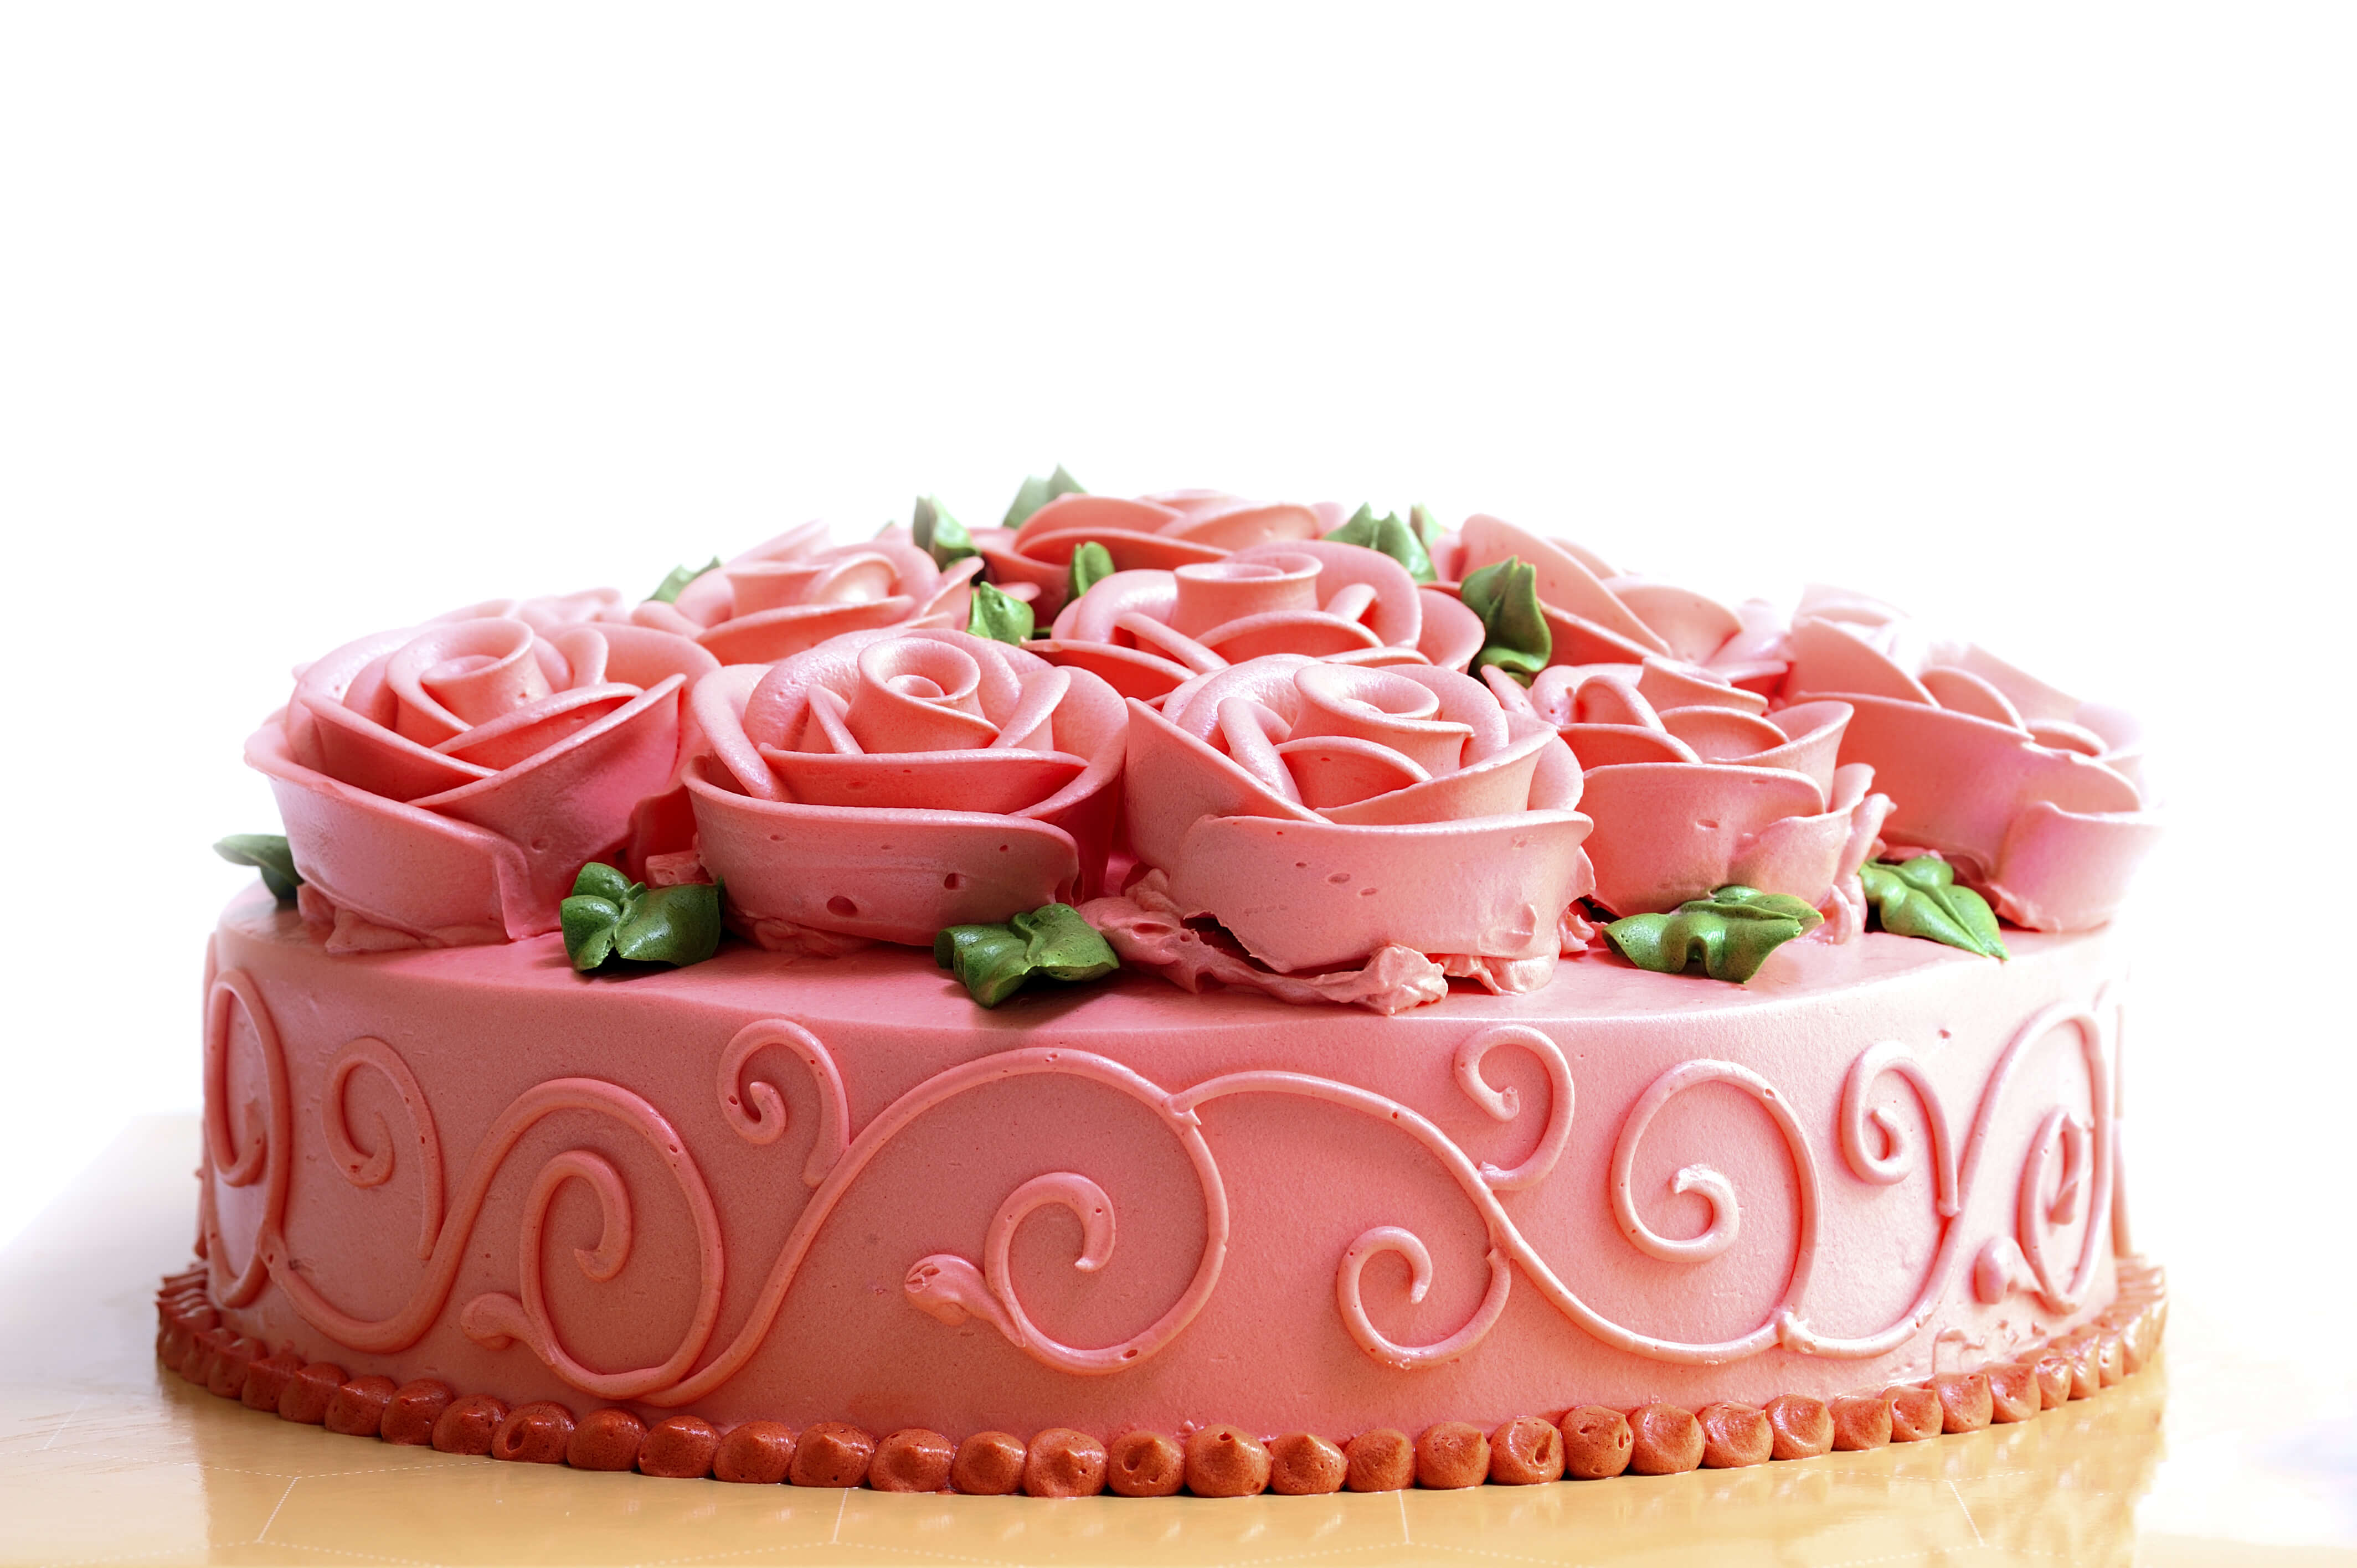 A Beginner's Guide to Cake Decorating (with Infographic) - Escoffier Online